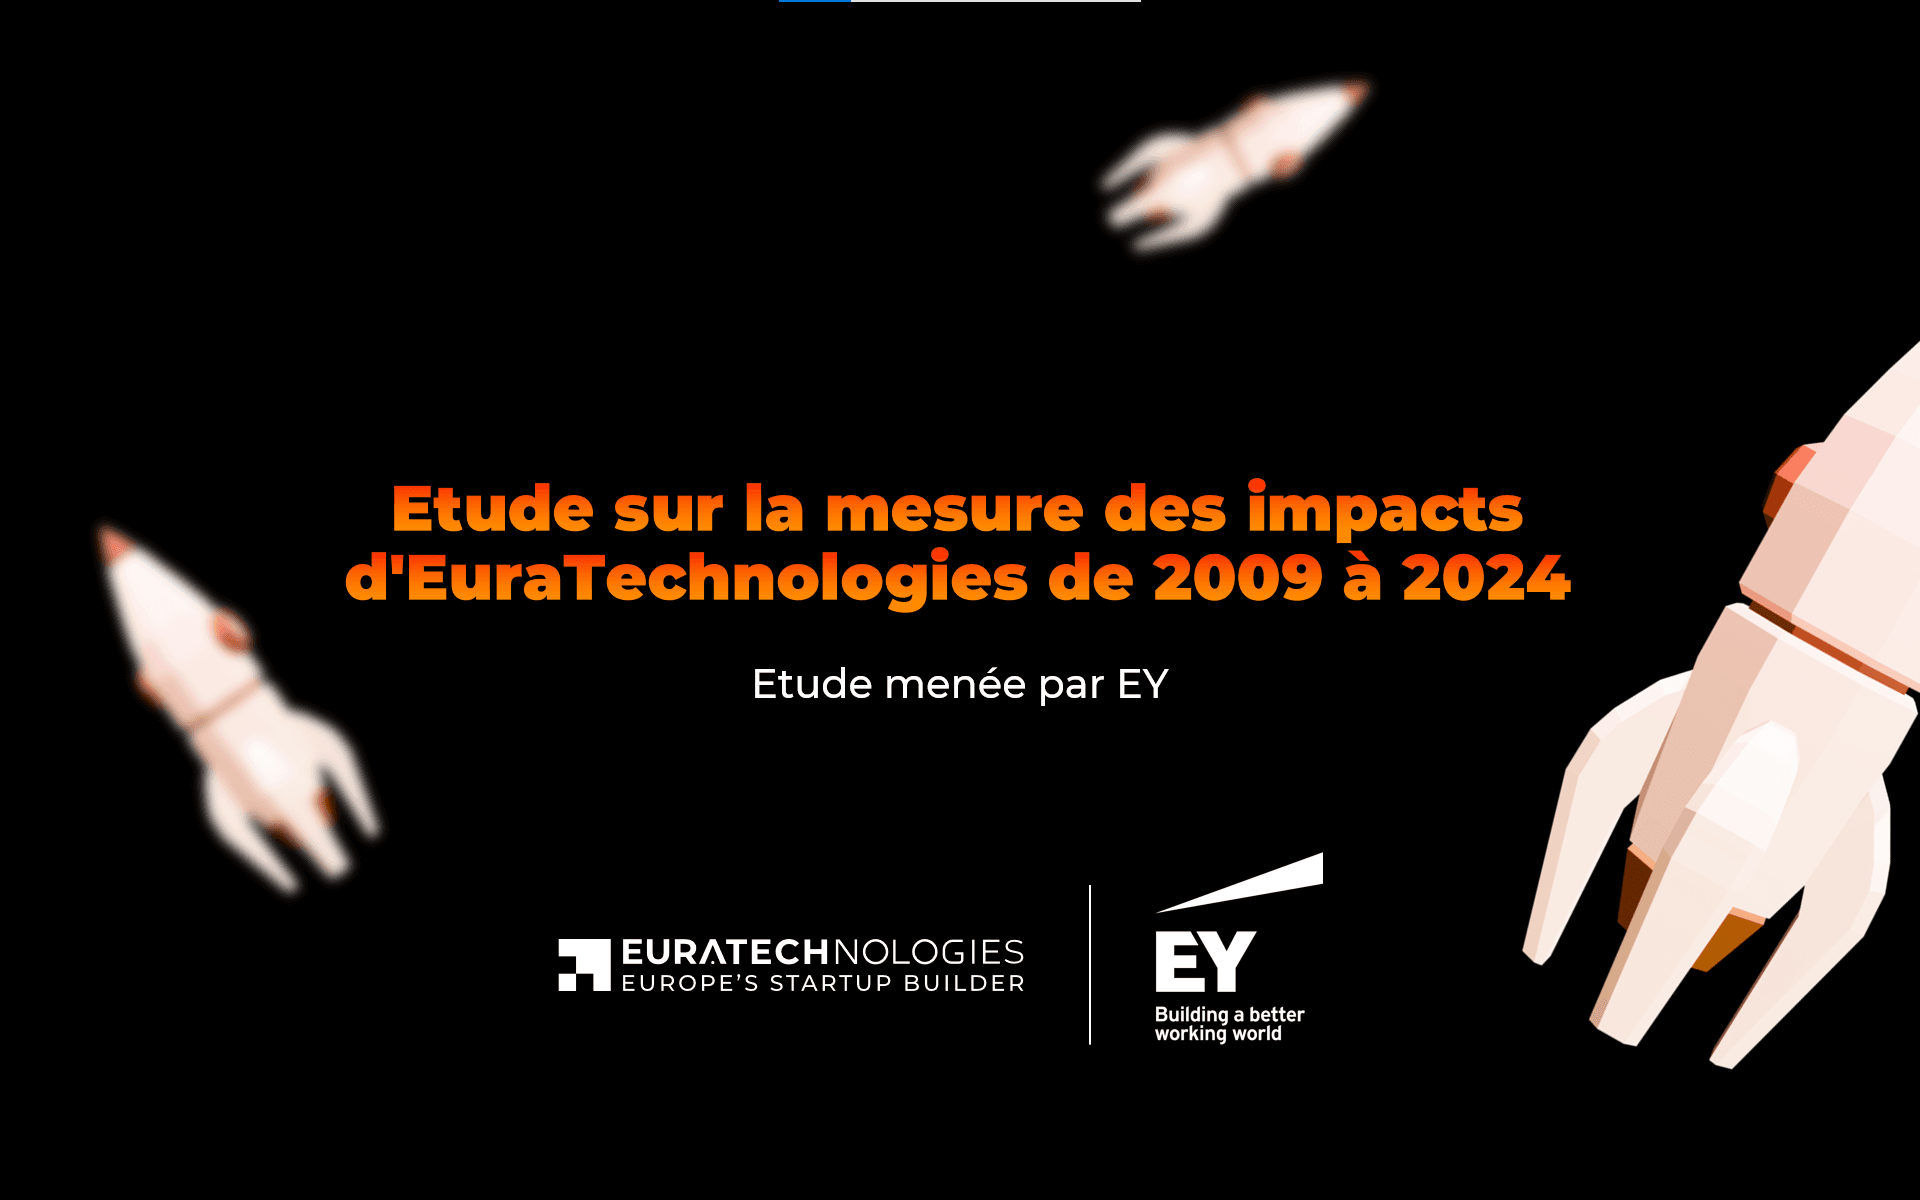 For its 15th anniversary, EuraTechnologies reveals a study on its impact from 2009 to today